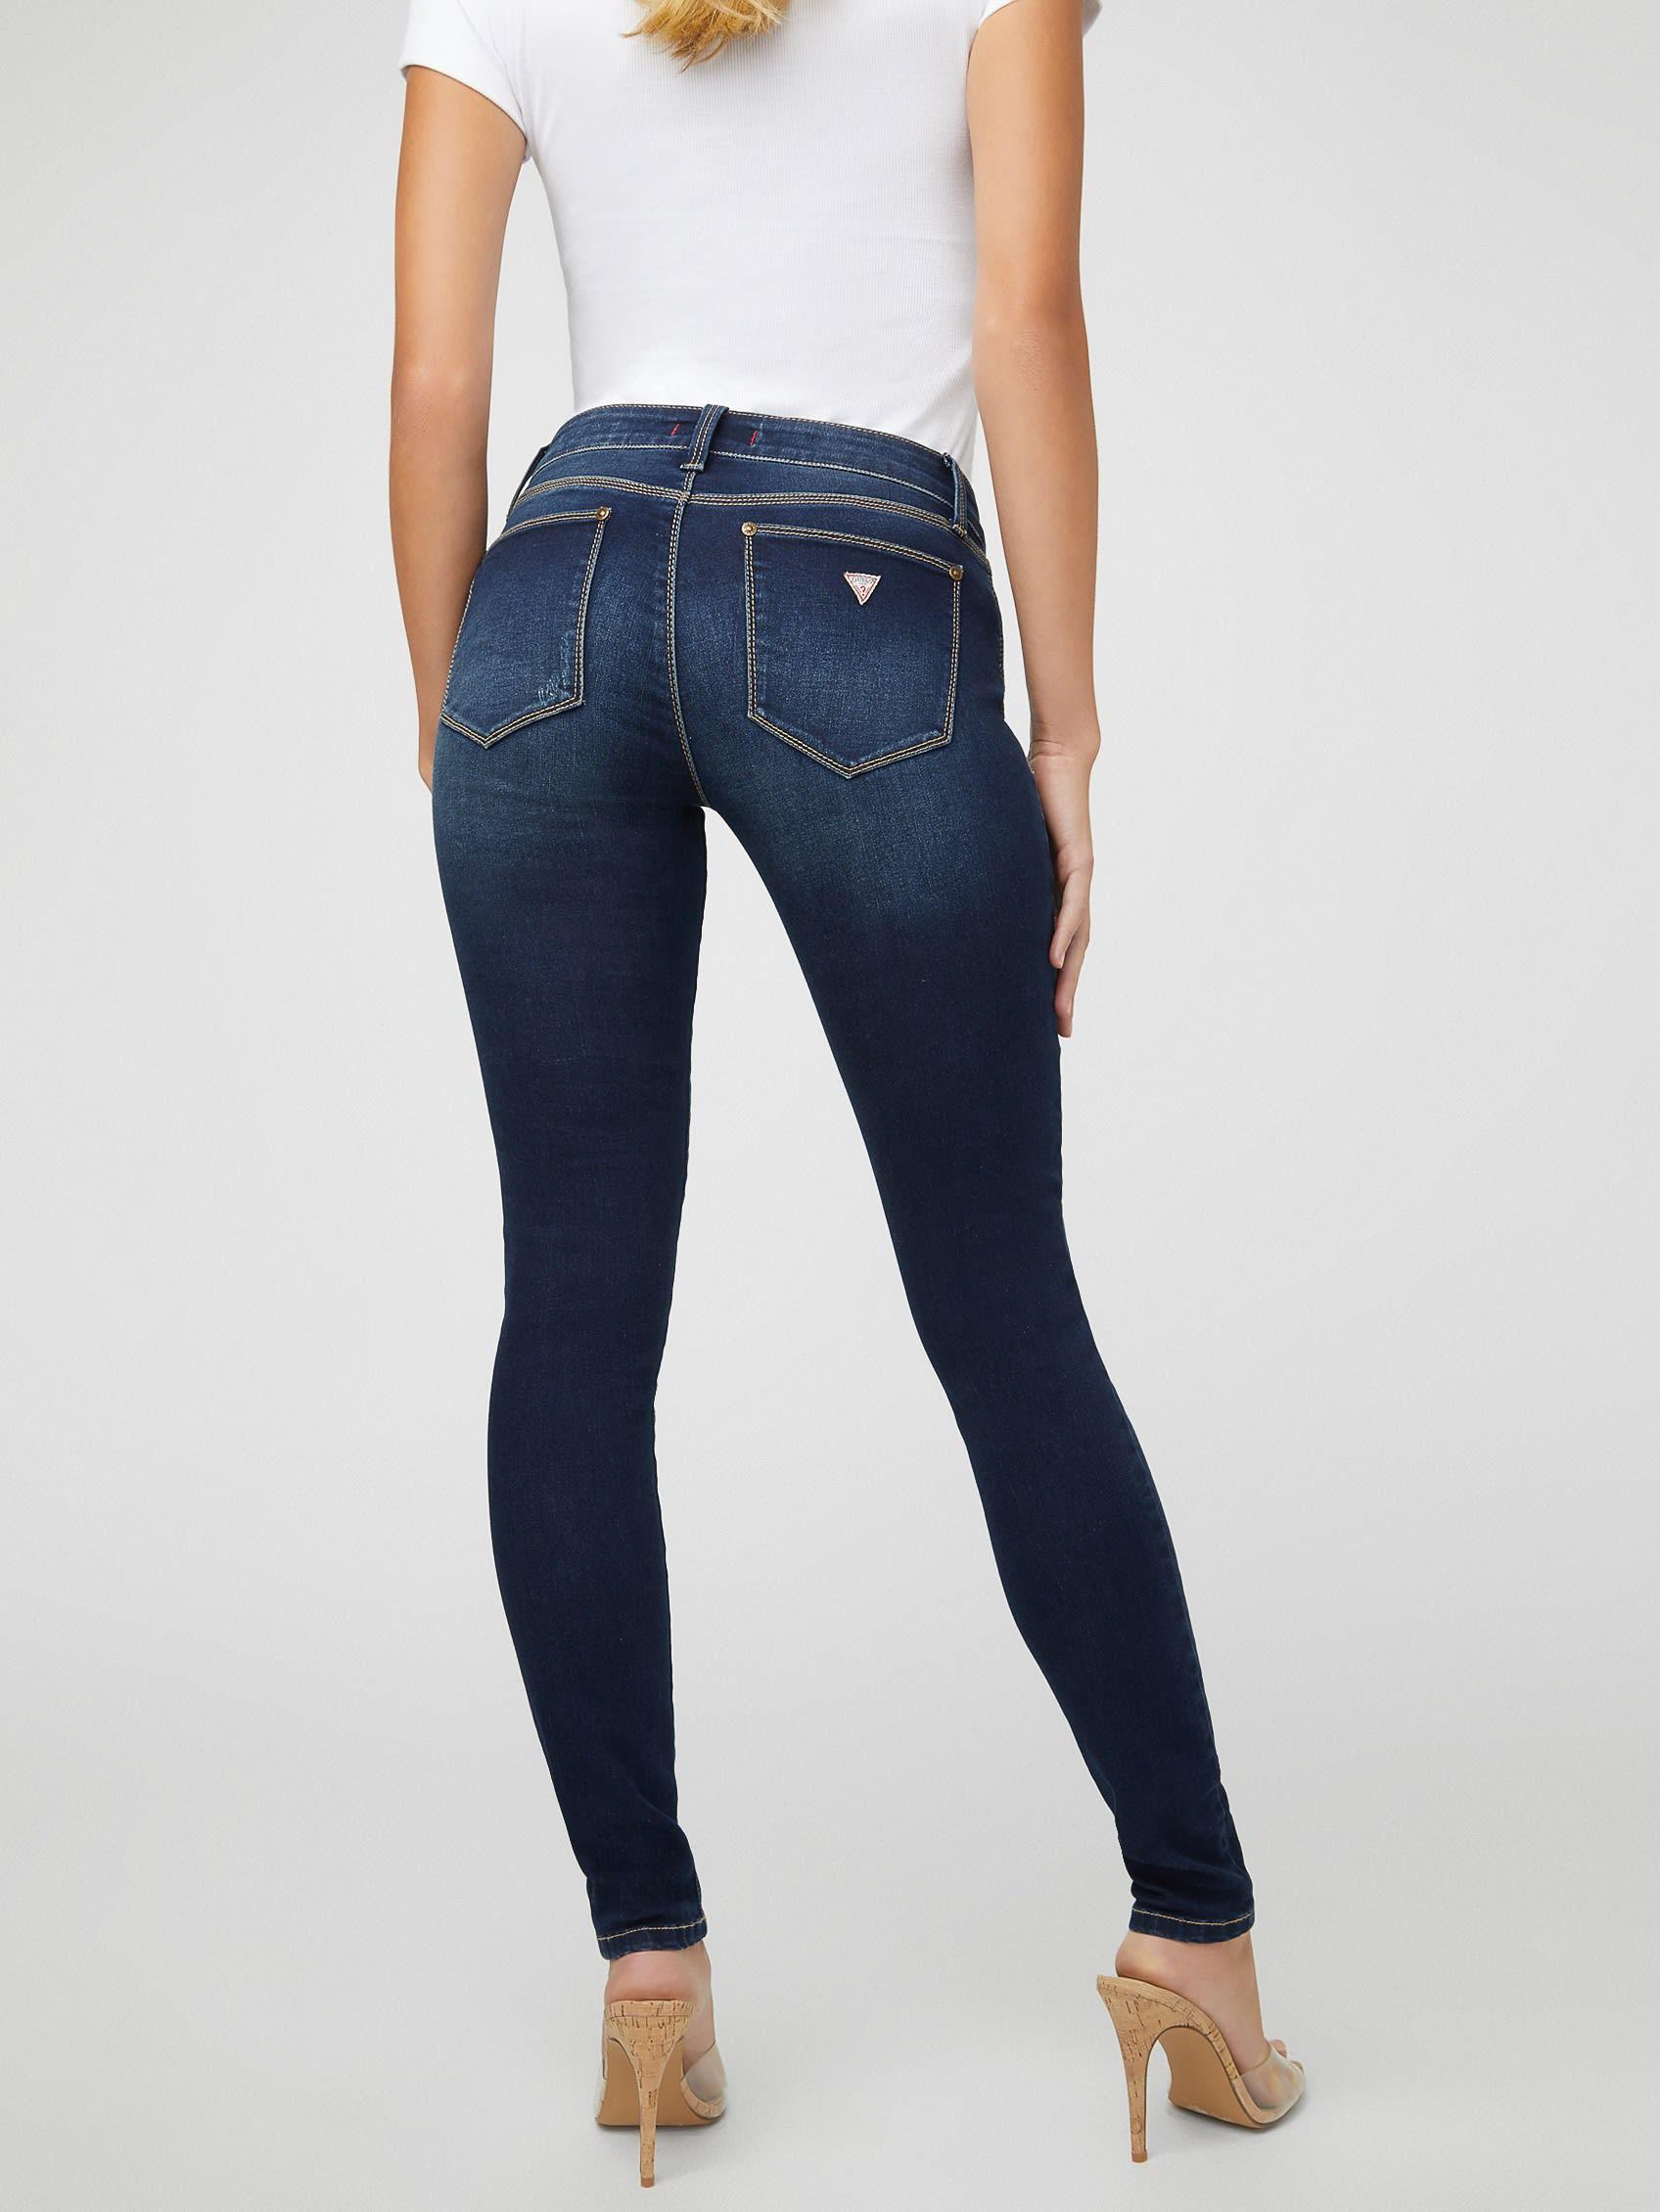 Guess Factory Sienna Curvy Skinny Low-rise Jeans in Blue | Lyst